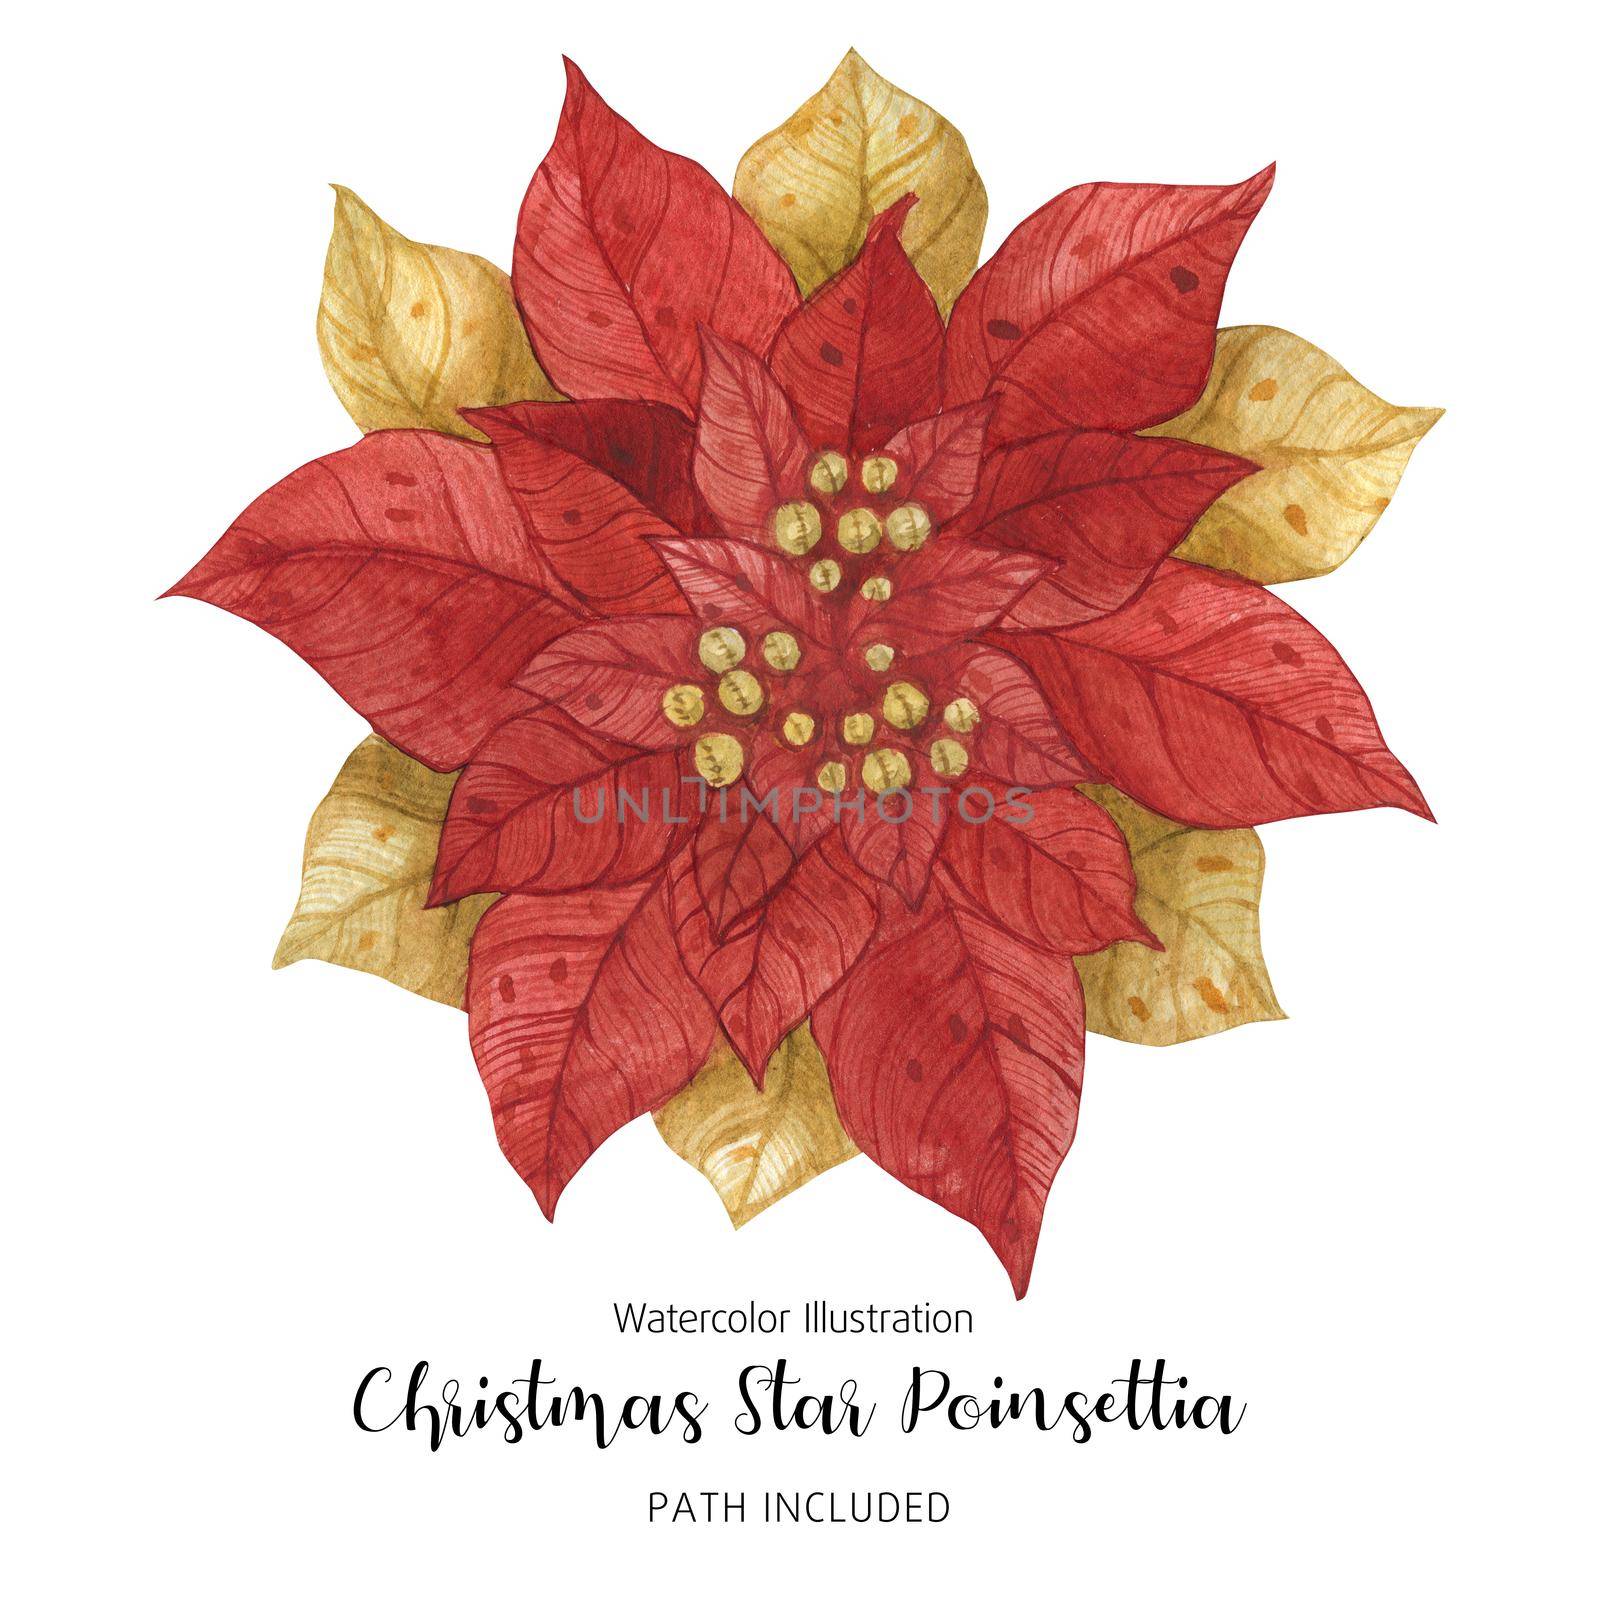 Poinsettia Red Gold Christmas Star by Xeniasnowstorm